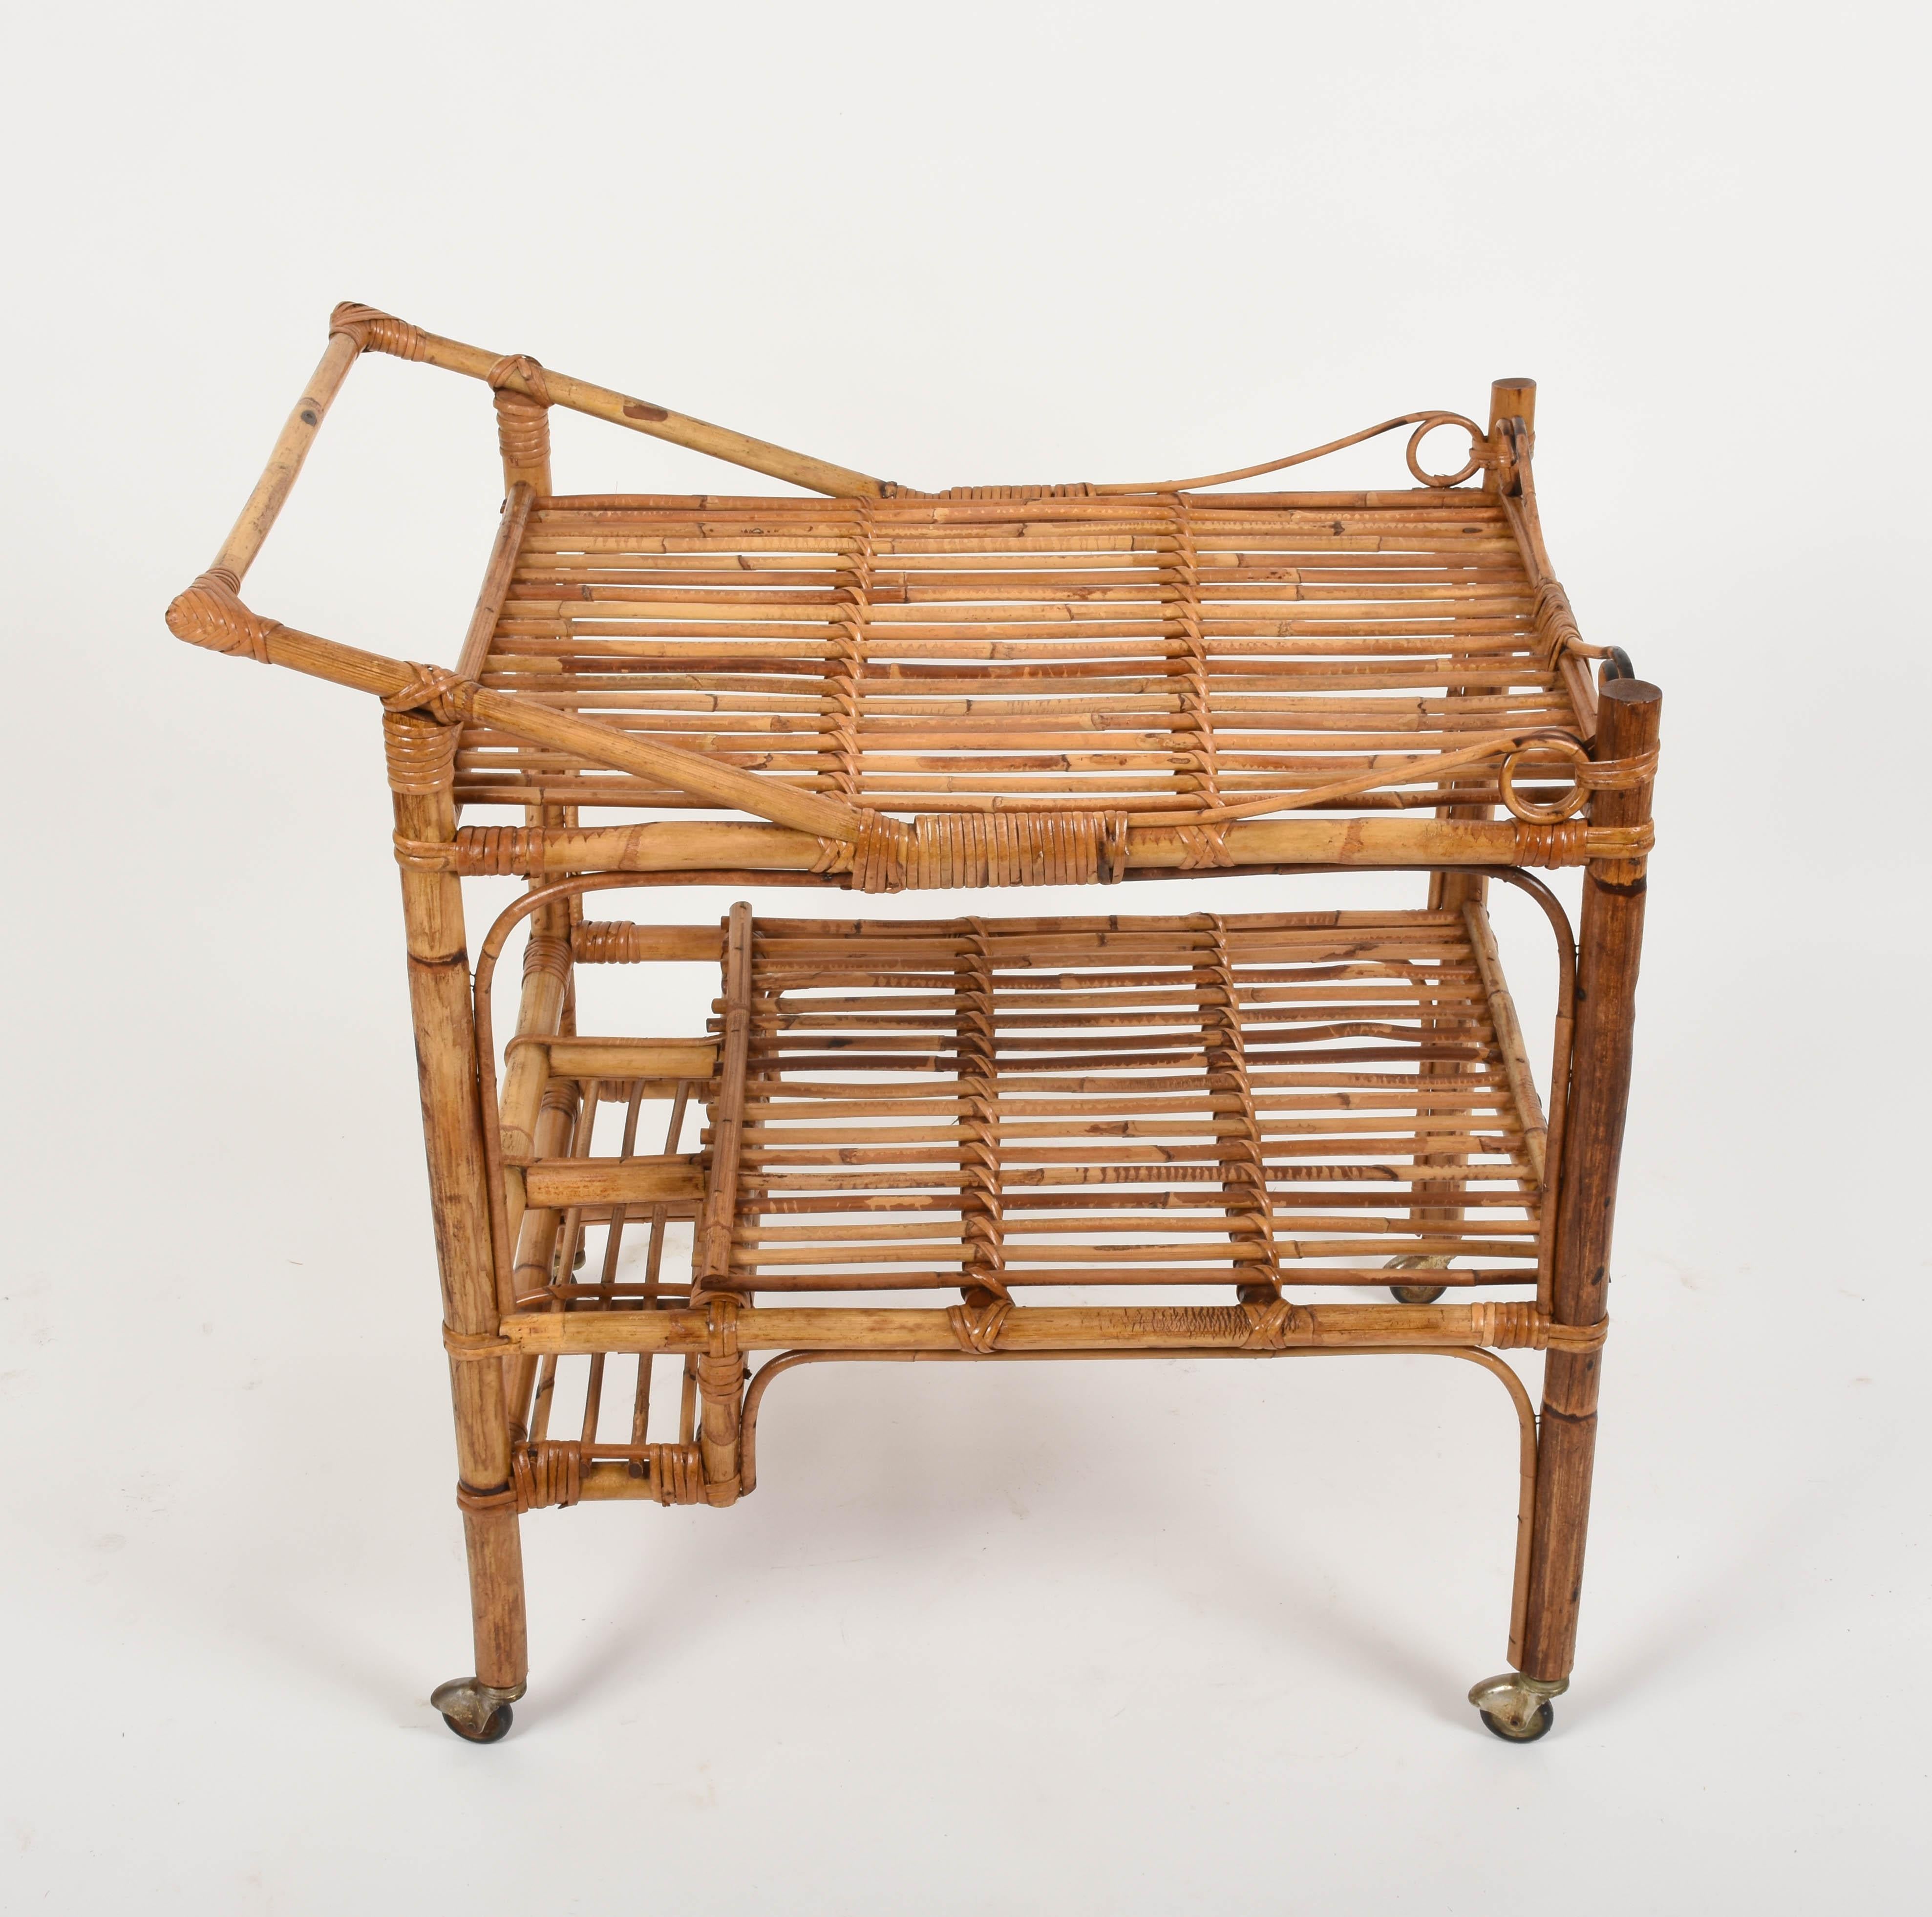 Mid-Century Modern French Riviera Rectangular Bamboo and Rattan Trolley Bar Cart, France, 1960s